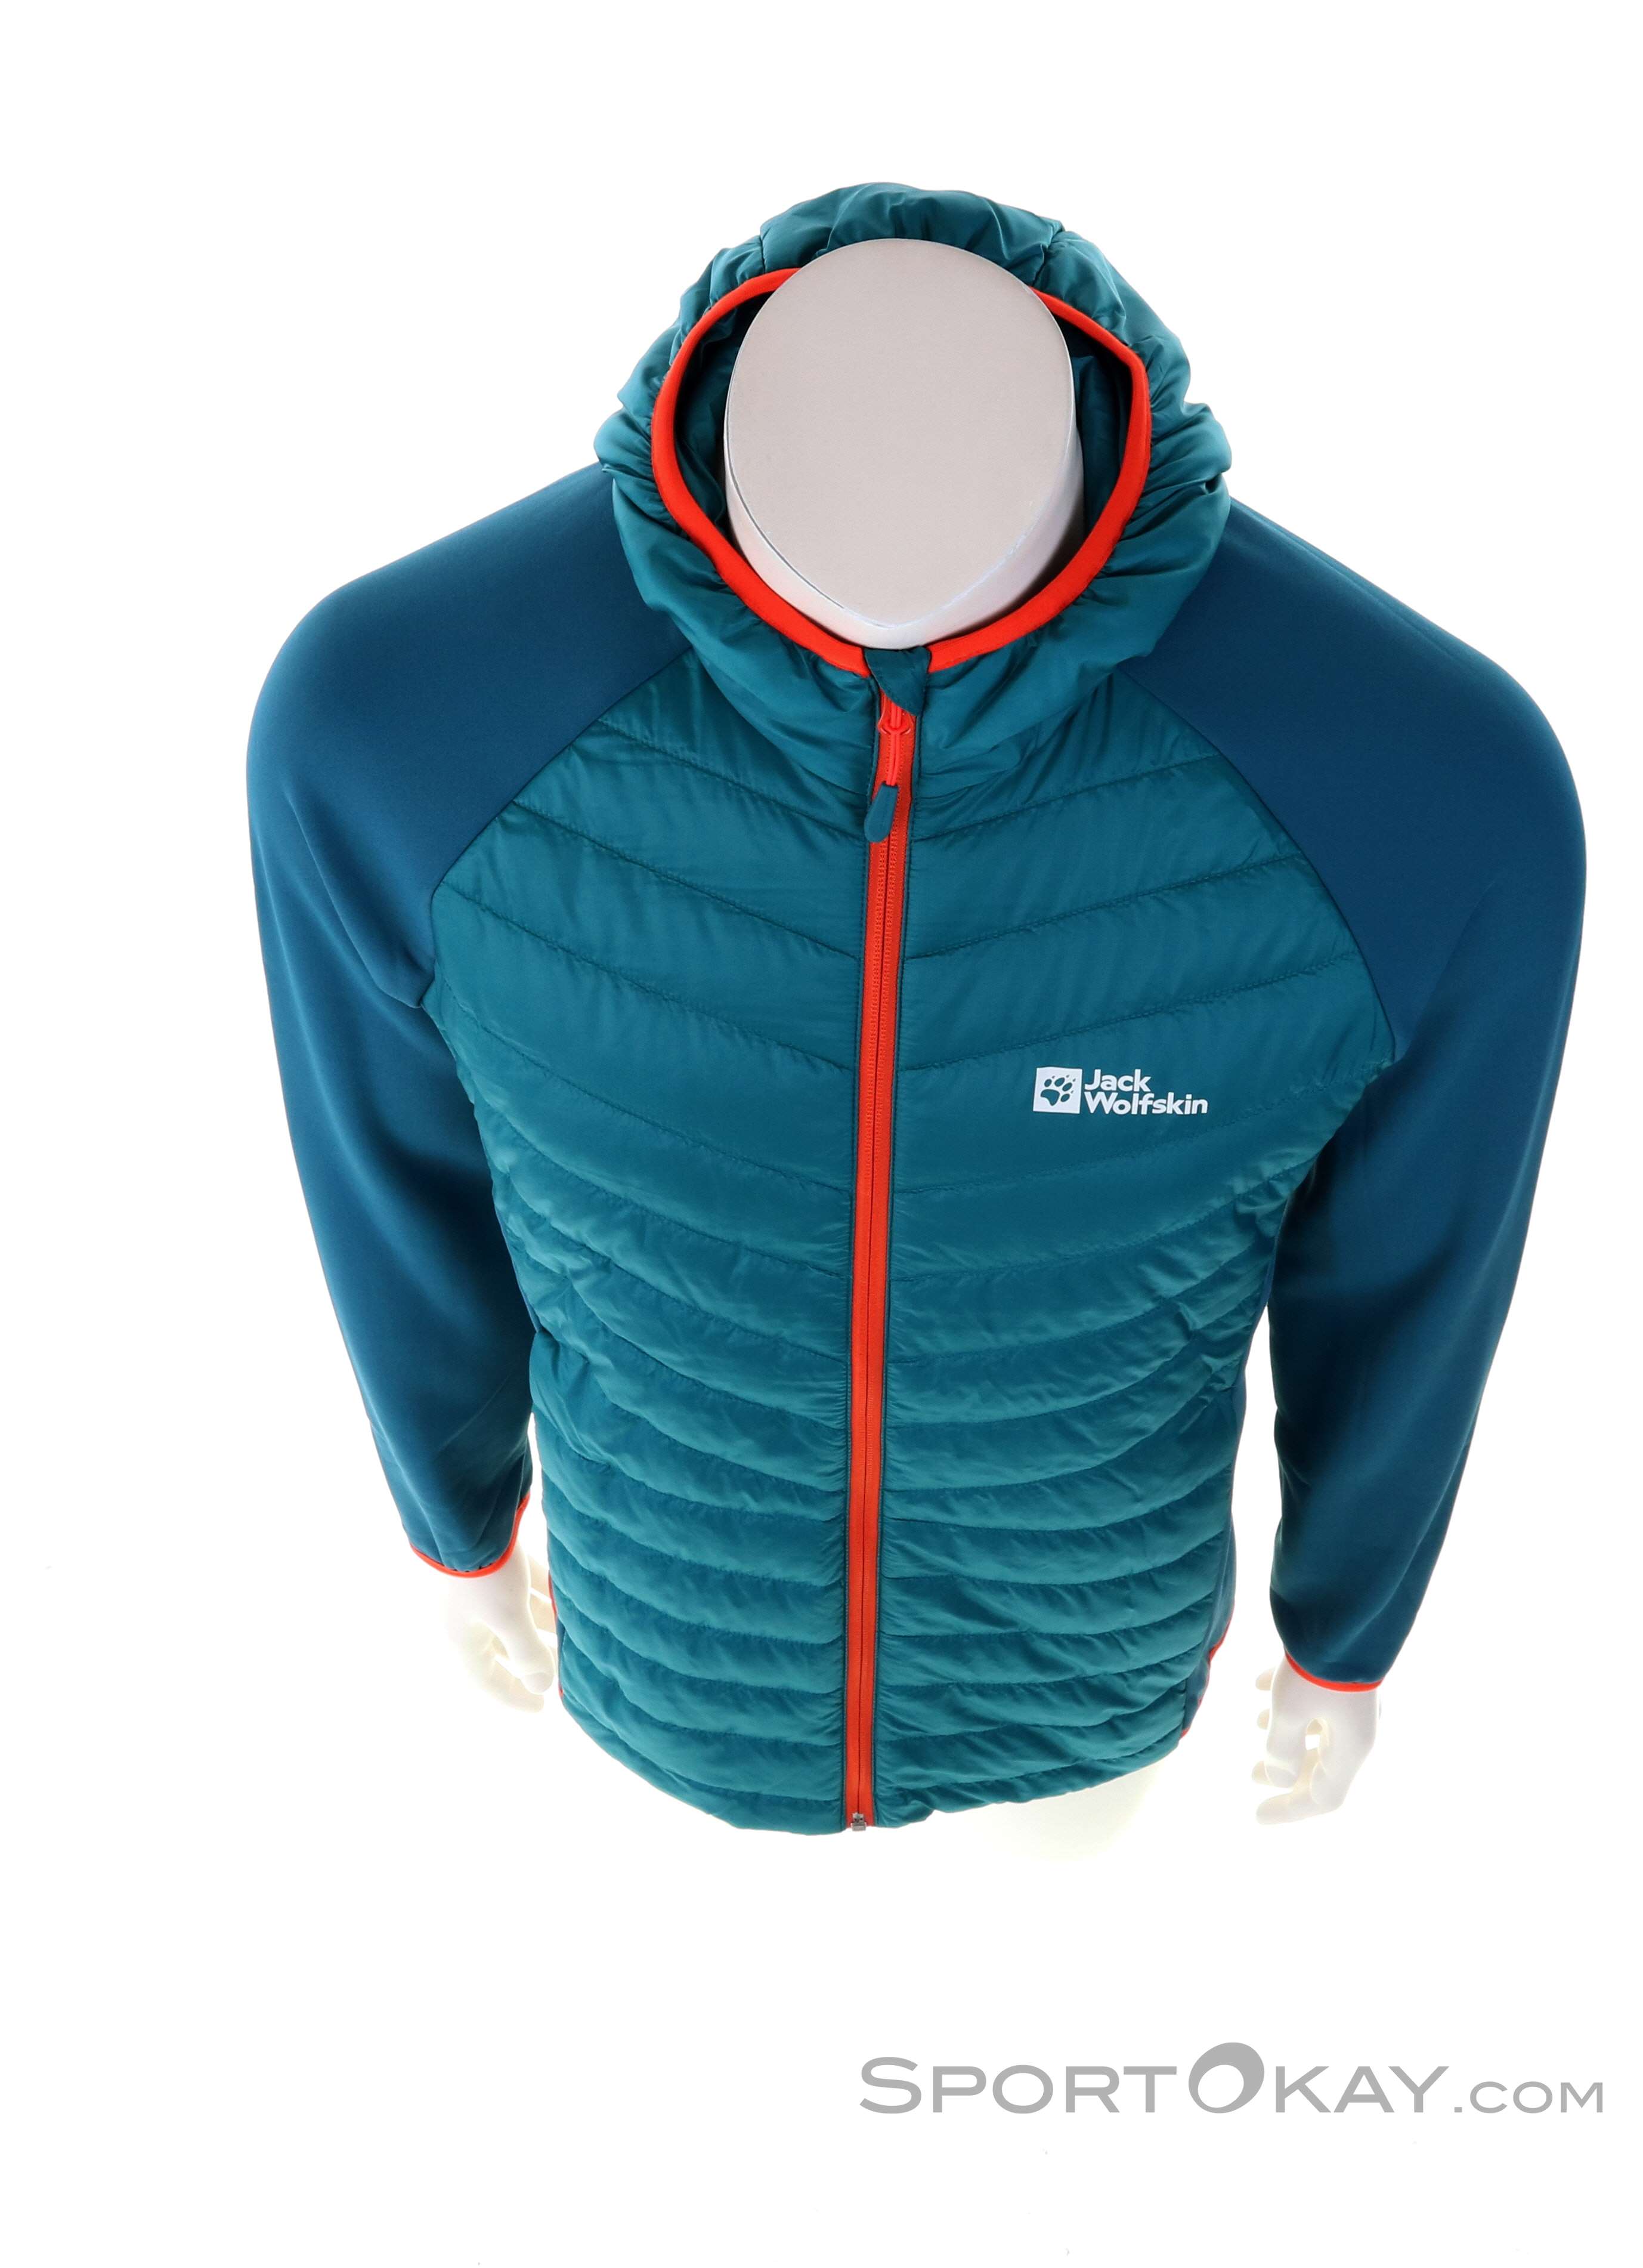 Outdoor Outdoor Pro Routeburn Outdoor Clothing Jacket - Mens - All Jackets - Wolfskin - Jack Hybrid